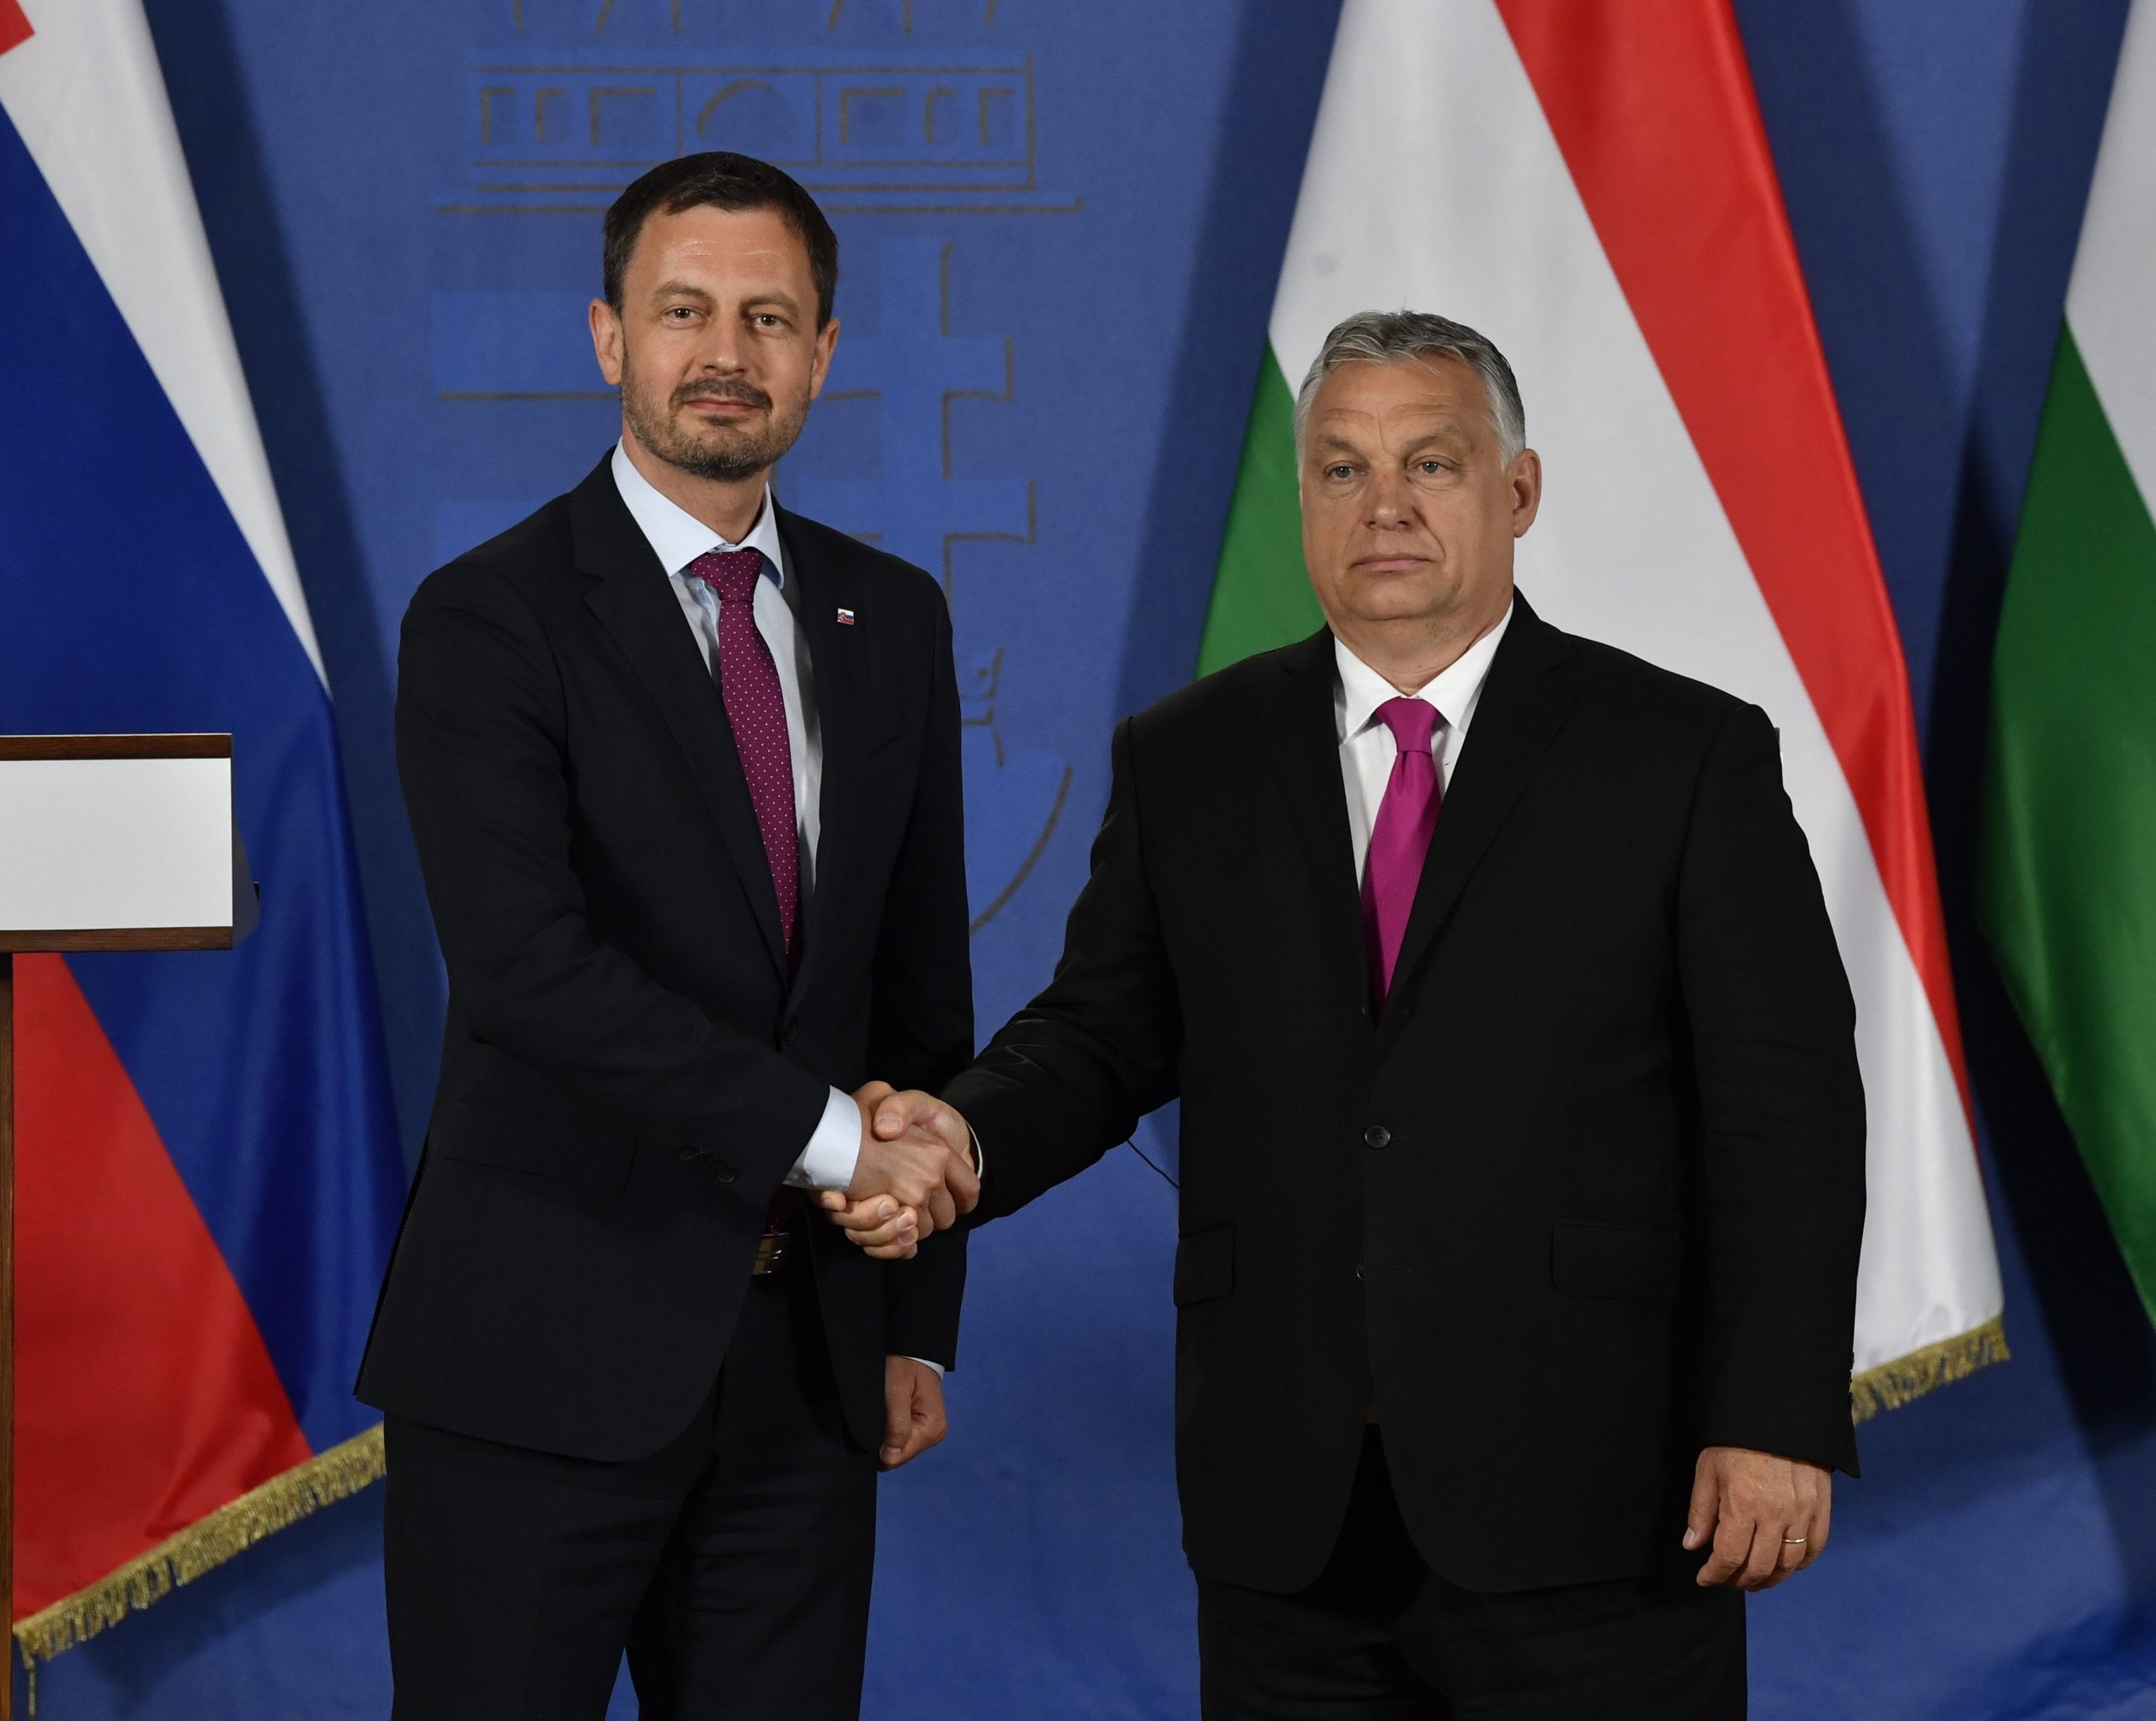 Hungary Backs Down from Slovak Land Acquisition Plan After Fiery Criticism